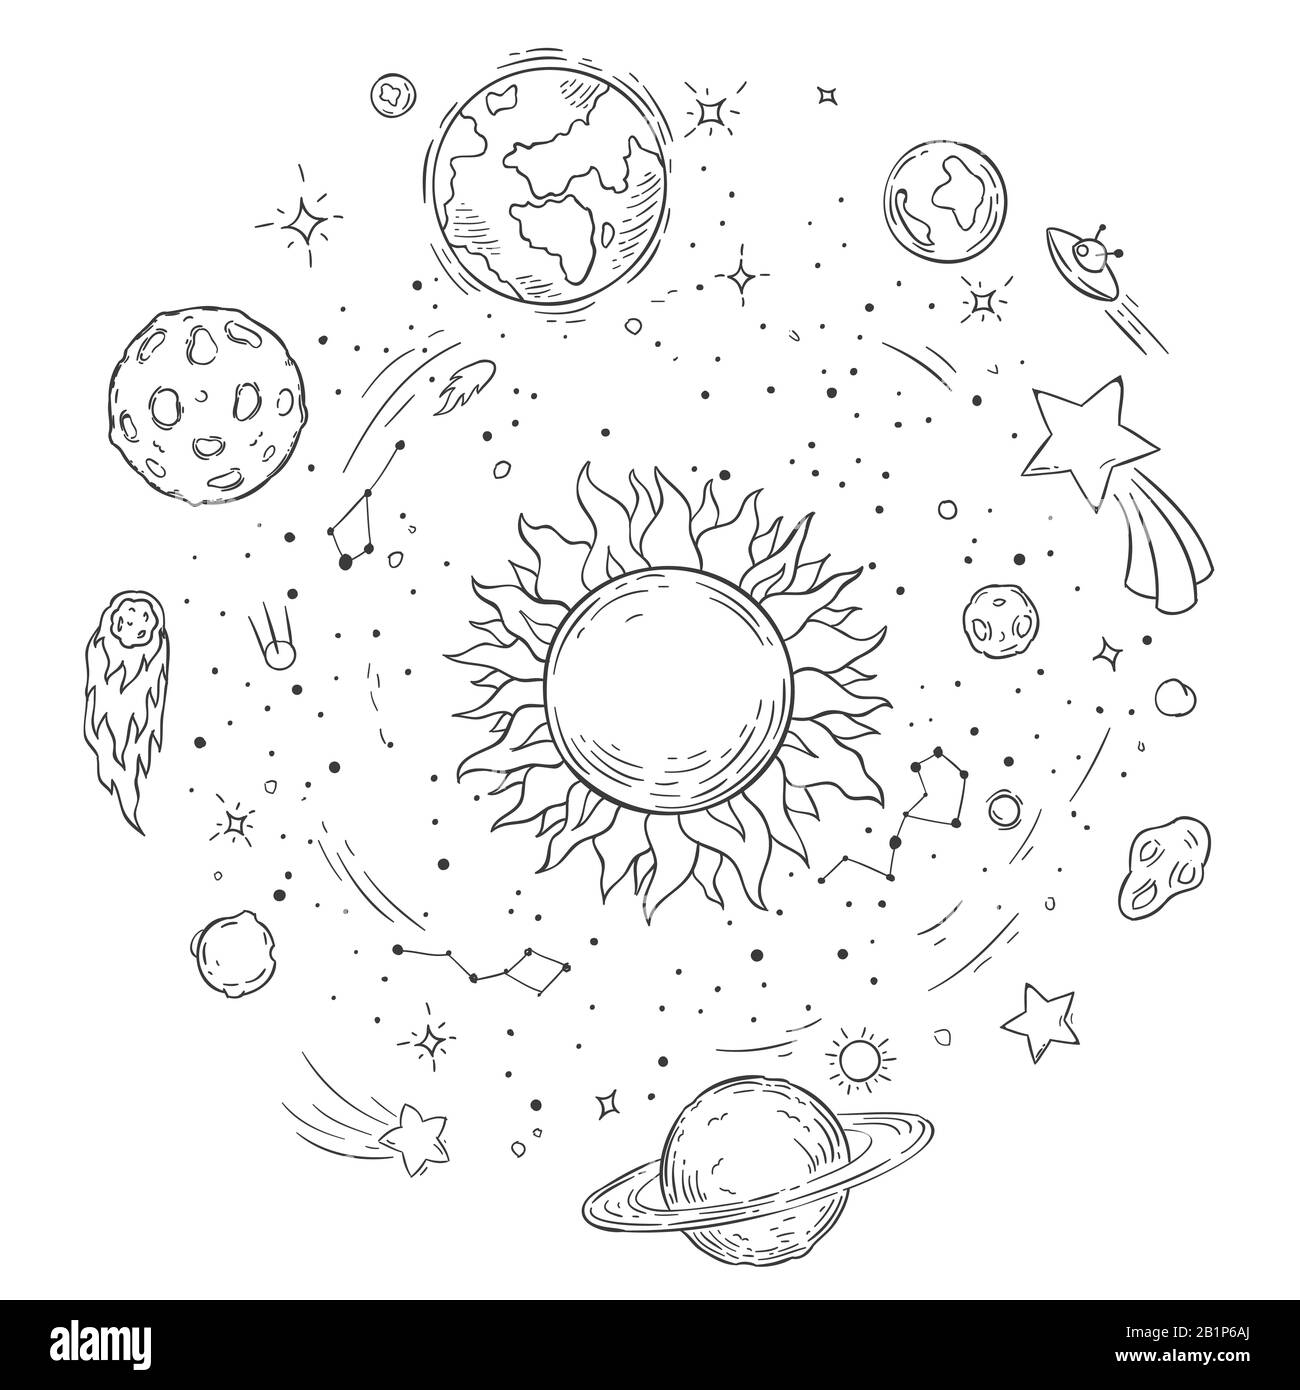 Cosmic Black and White Stock Photos & Images - Alamy